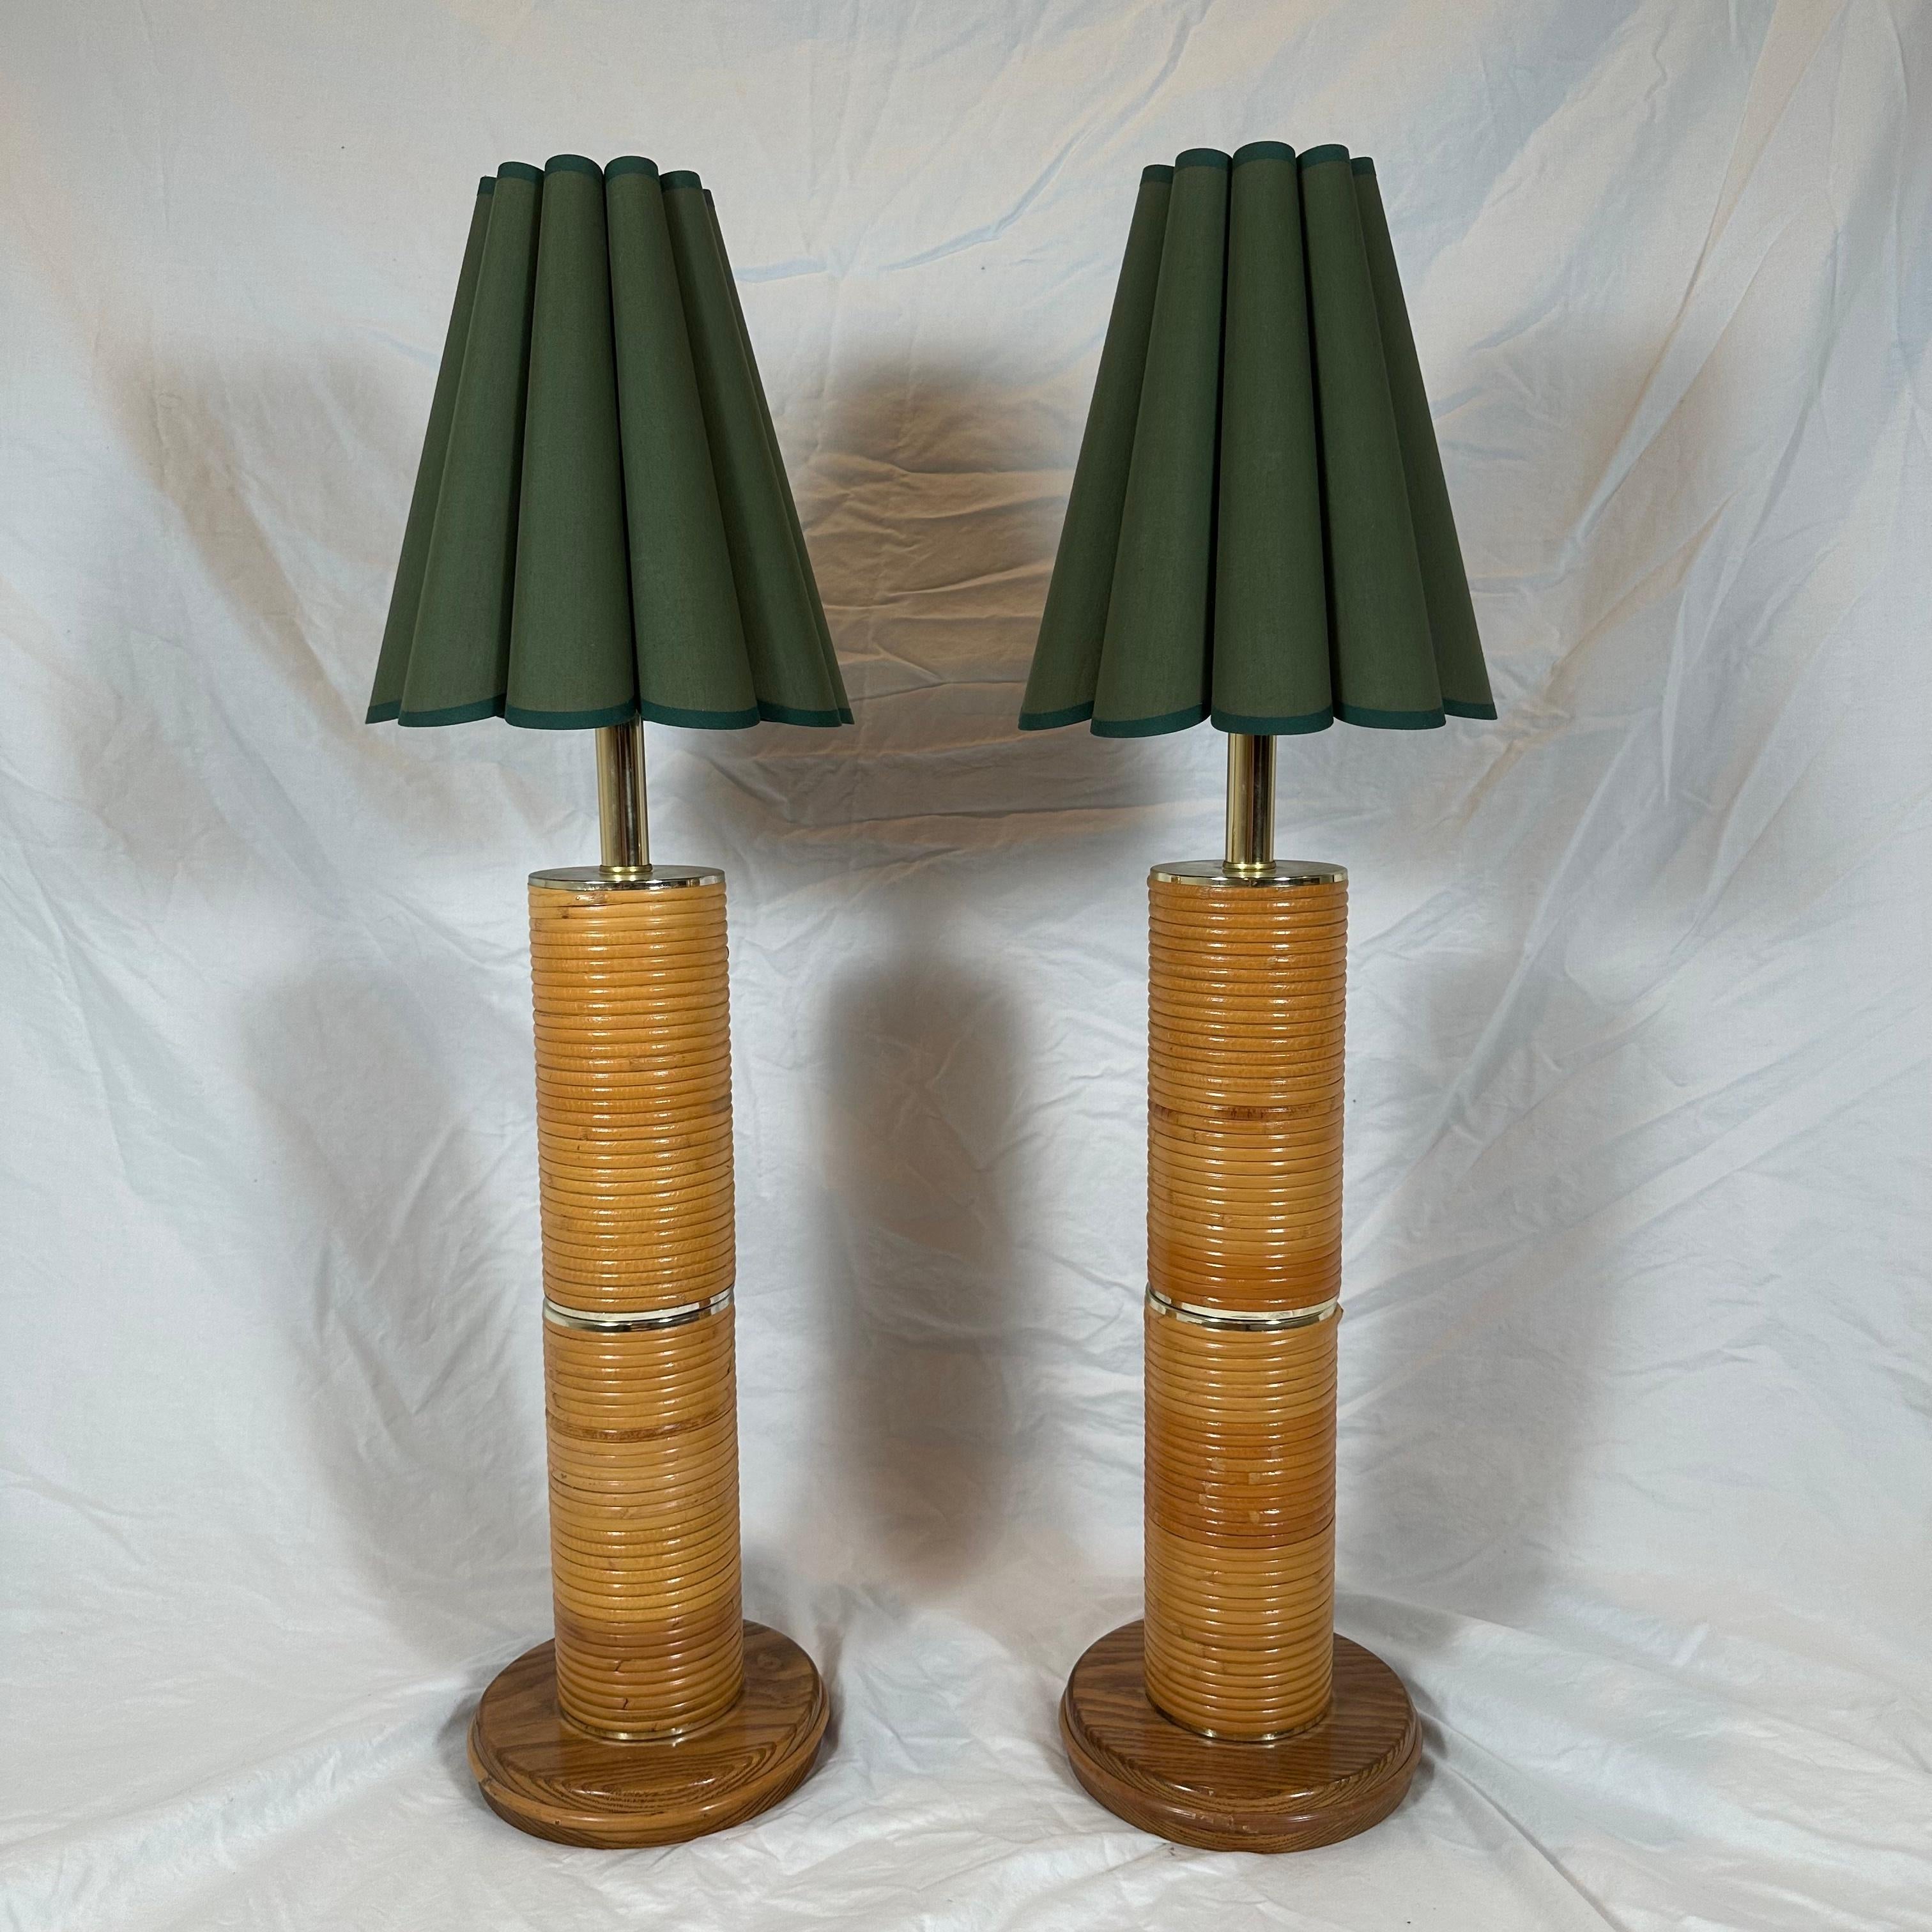 A pair of absolutely monumental, massive pencil reed and brass table lamps. Italian Mid-Century style inspired by Gabriella Crespi. Cylindrical, columnar in form, ringed by ribbed, horizontal bands of split reed bamboo with brass accents. Custom